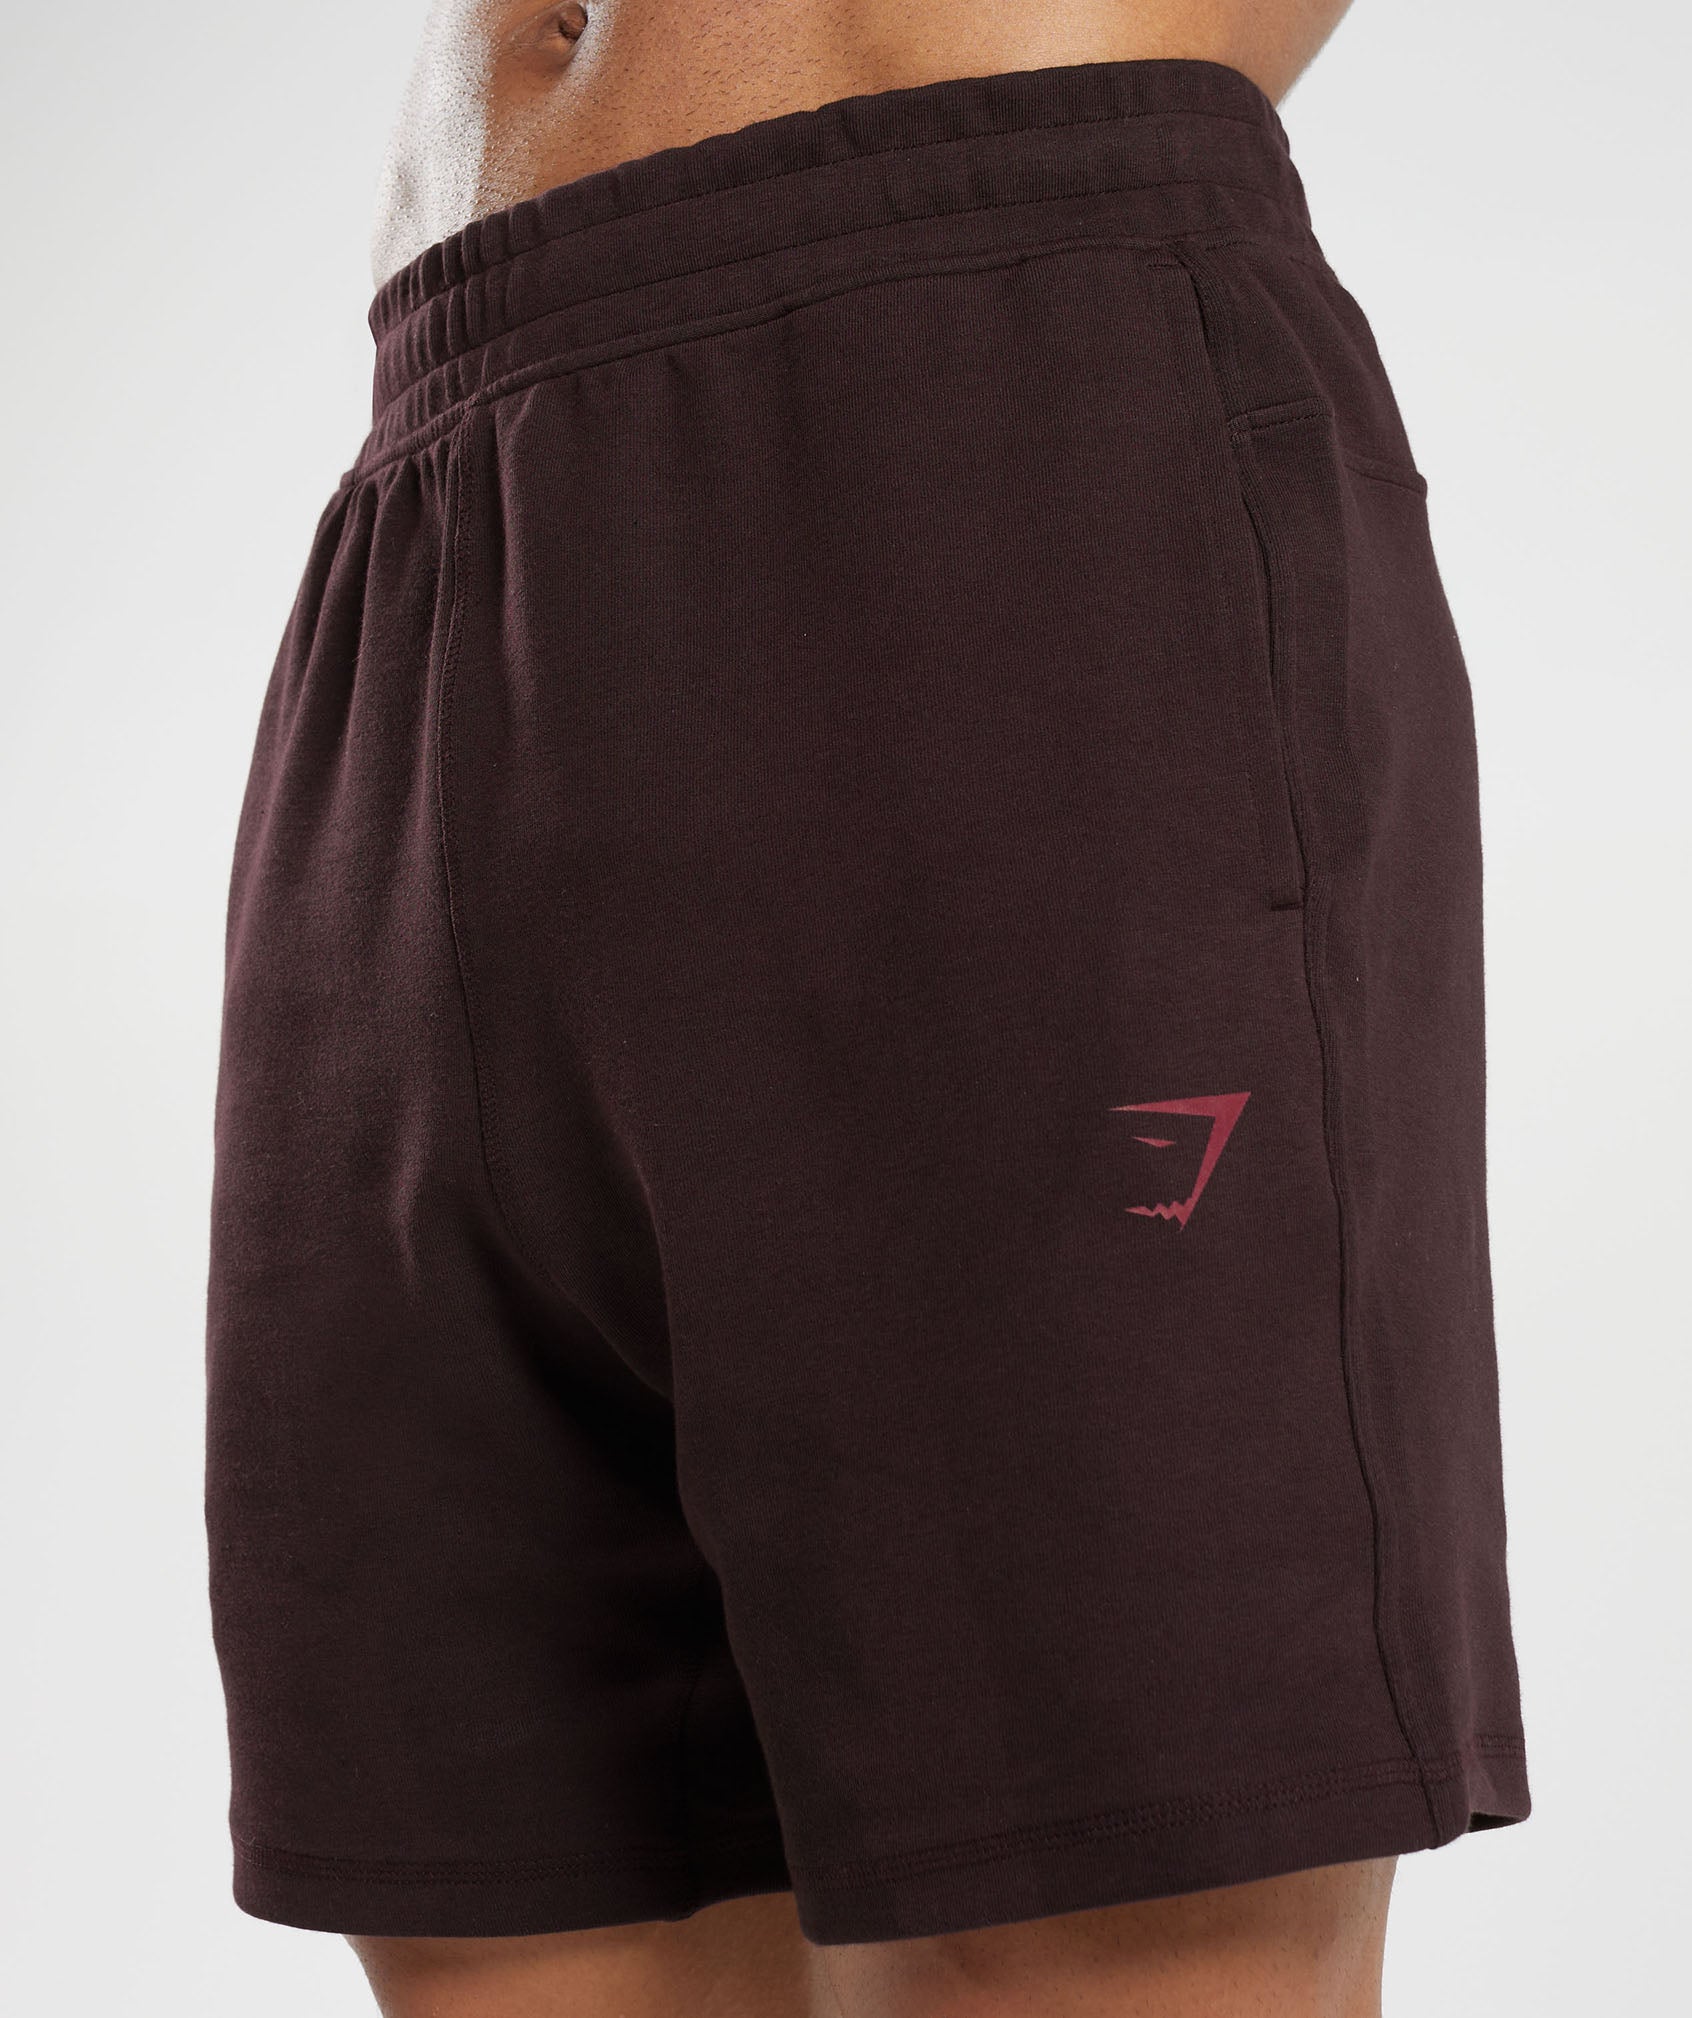 Bold 7" Shorts in Plum Brown - view 6